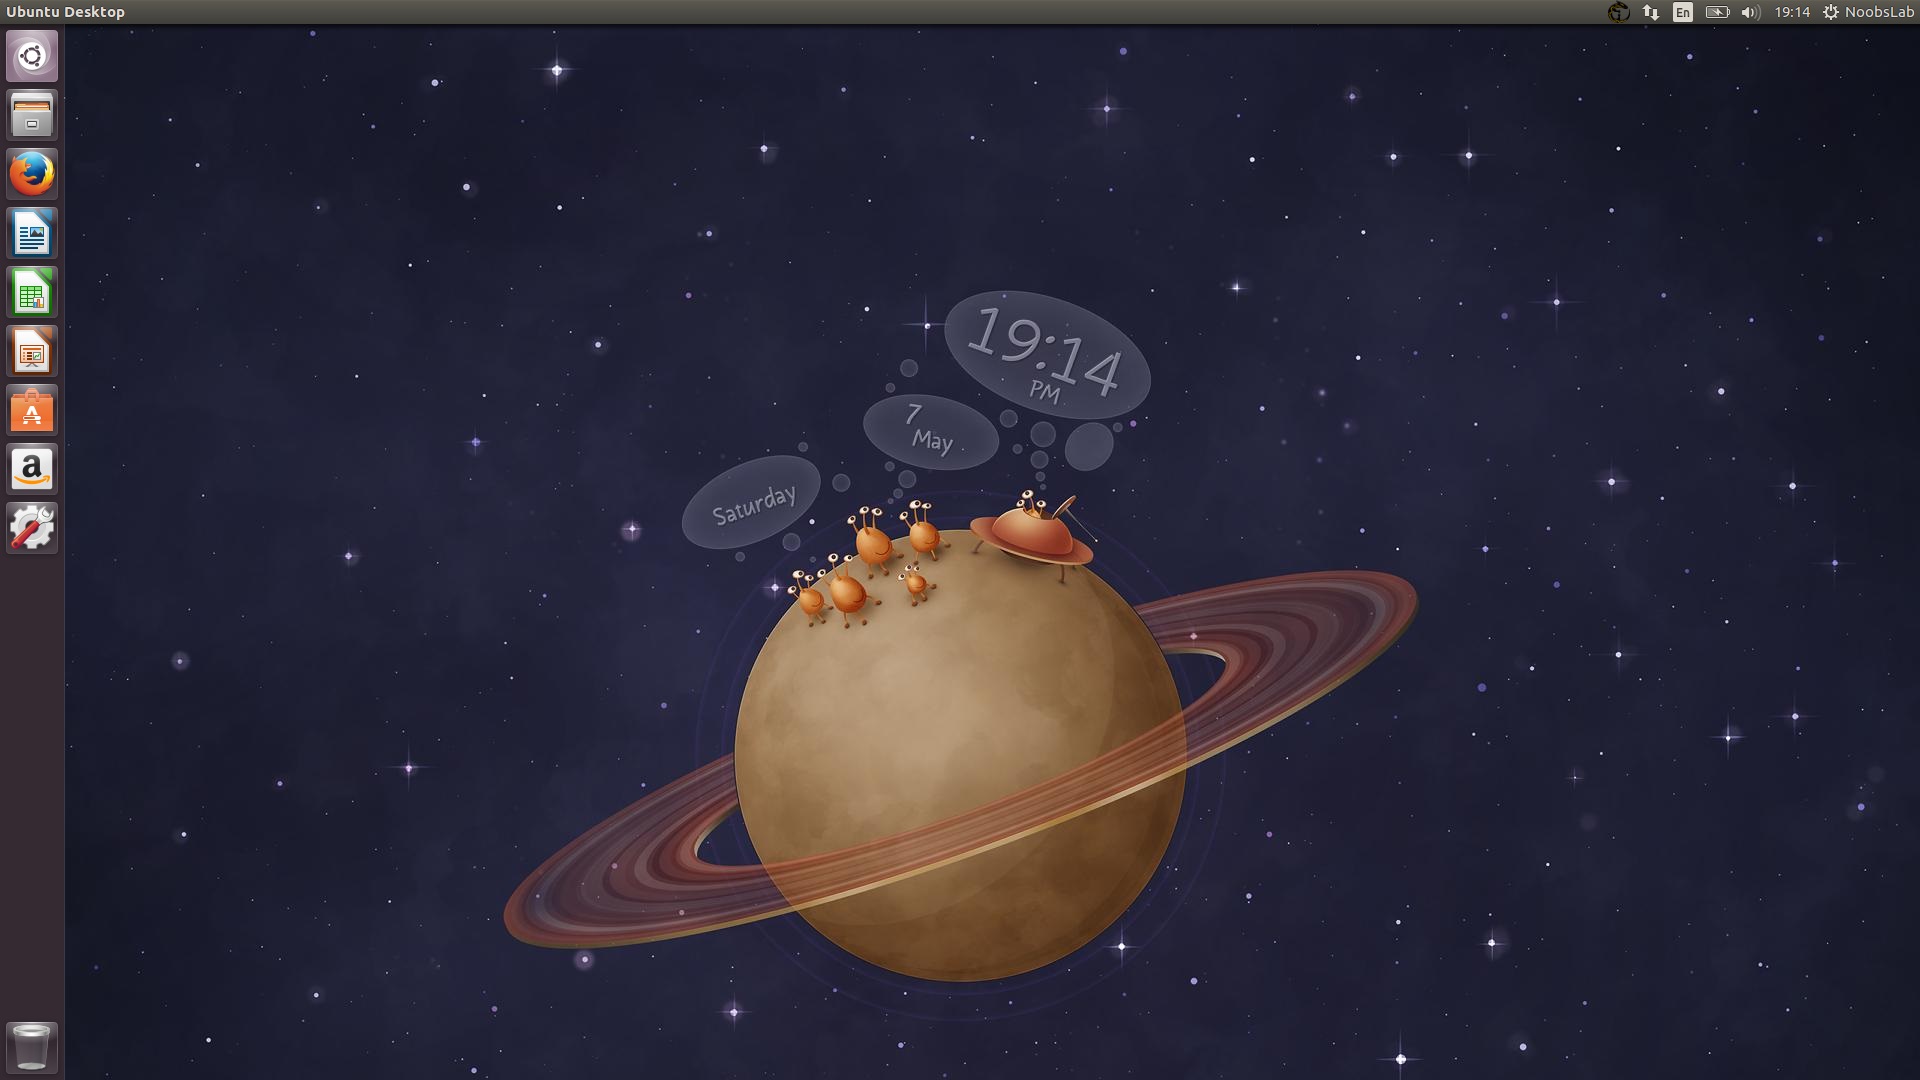 ubuntu wallpaper,planet,space,astronomical object,outer space,illustration